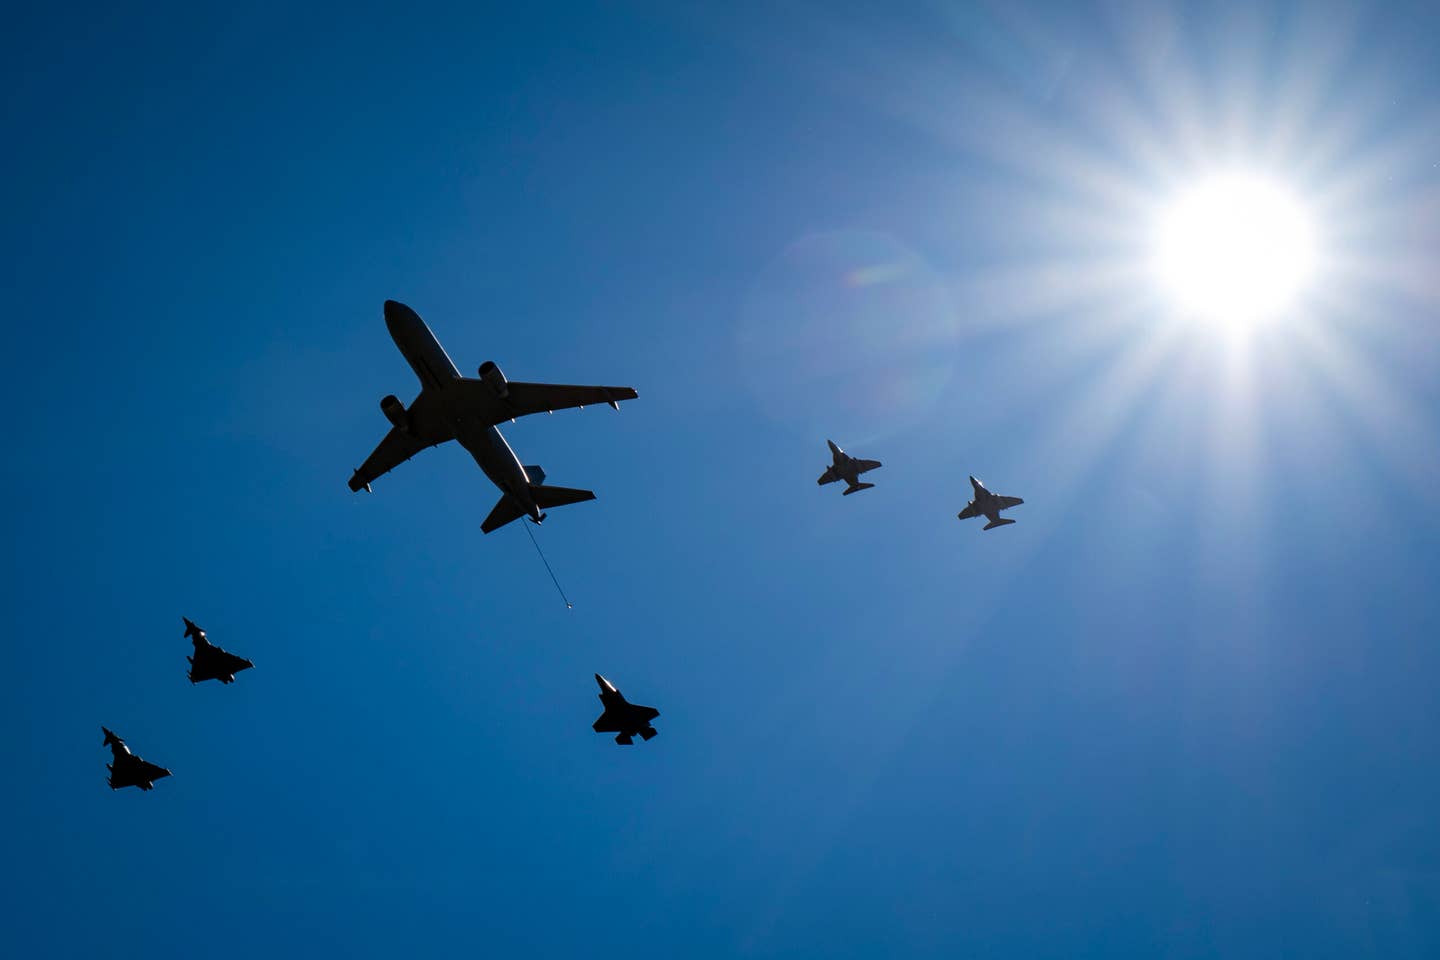 A KC-767 tanker followed by a single F-35 and flanked by pairs of Typhoons and T-346s. <em>Daniele Faccioli </em>